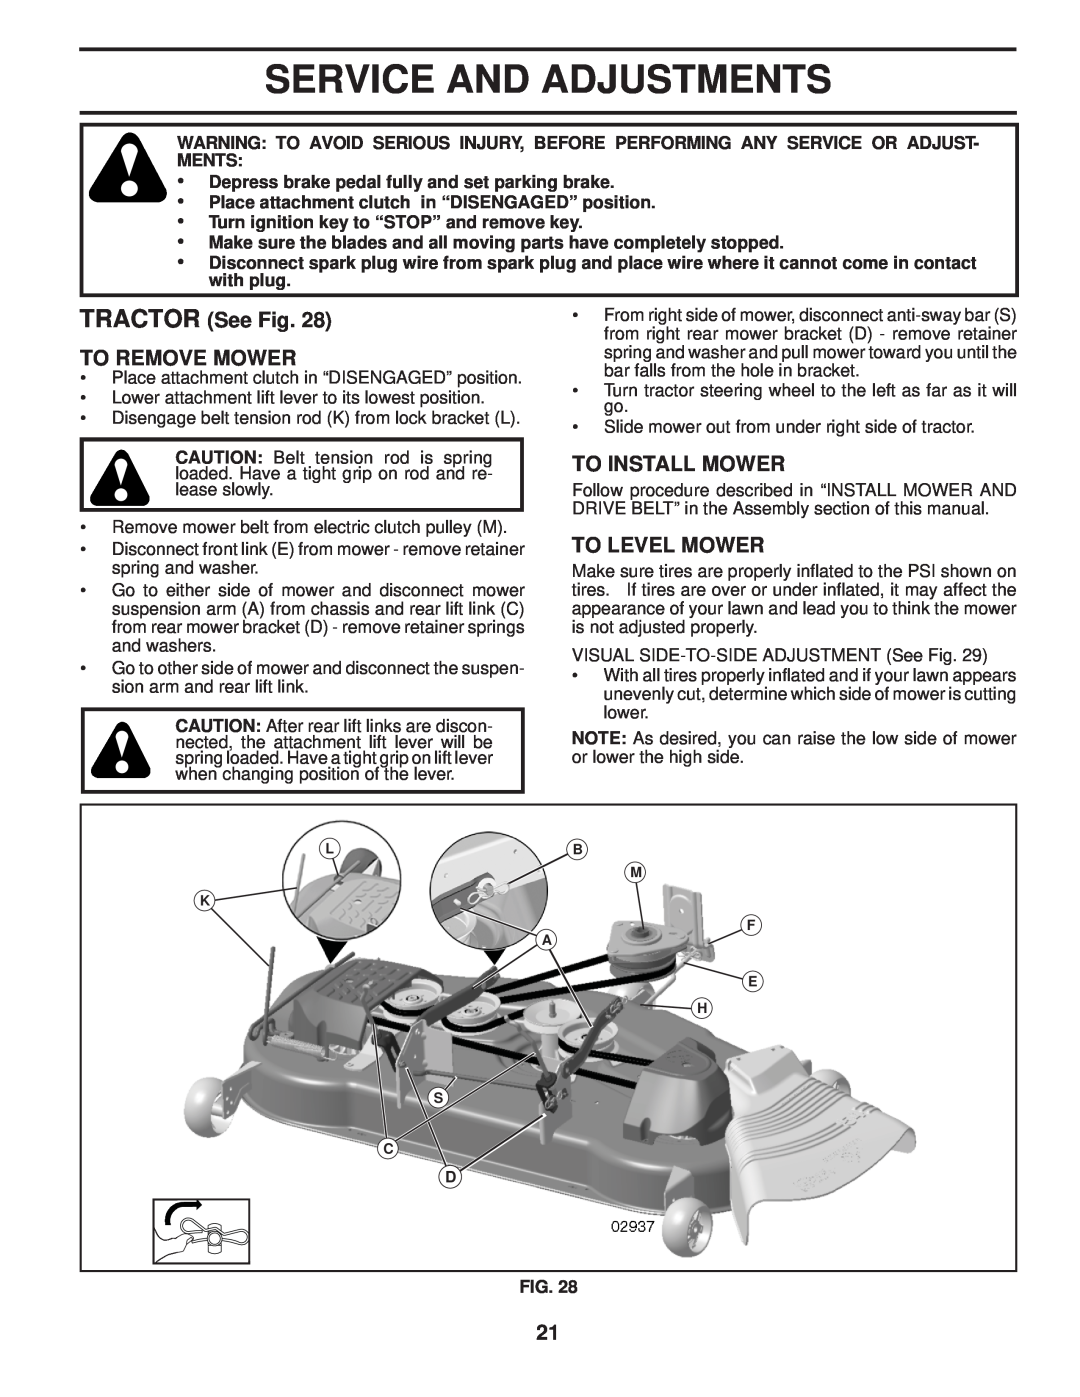 Husqvarna 2754 GLS manual Service And Adjustments, TRACTOR See Fig TO REMOVE MOWER, To Install Mower, To Level Mower 